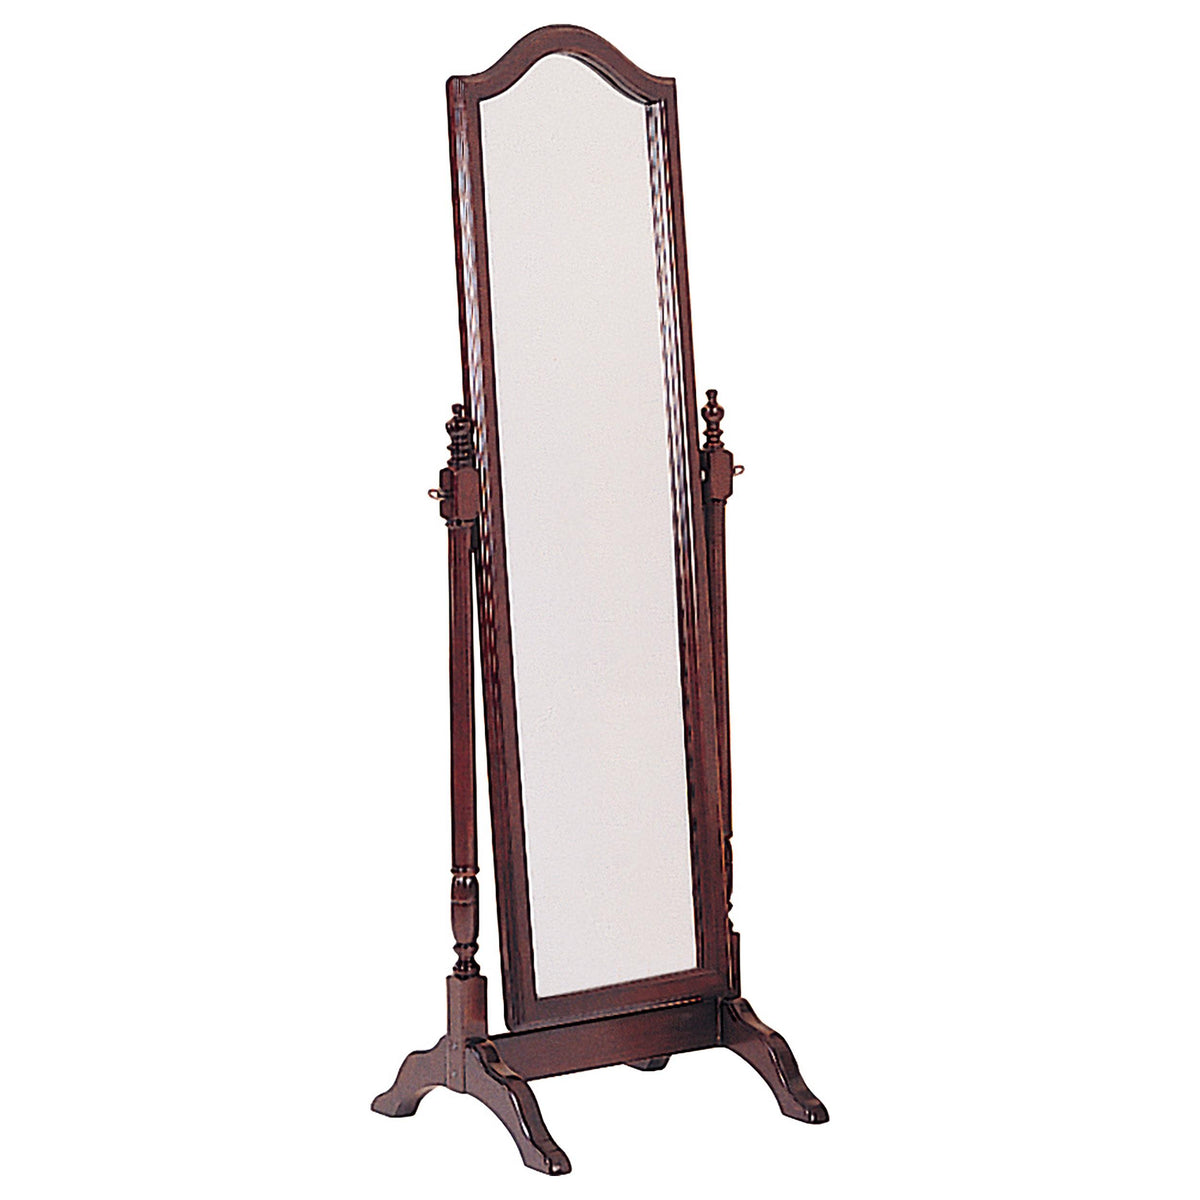 Cabot Rectangular Cheval Mirror with Arched Top Merlot  Las Vegas Furniture Stores